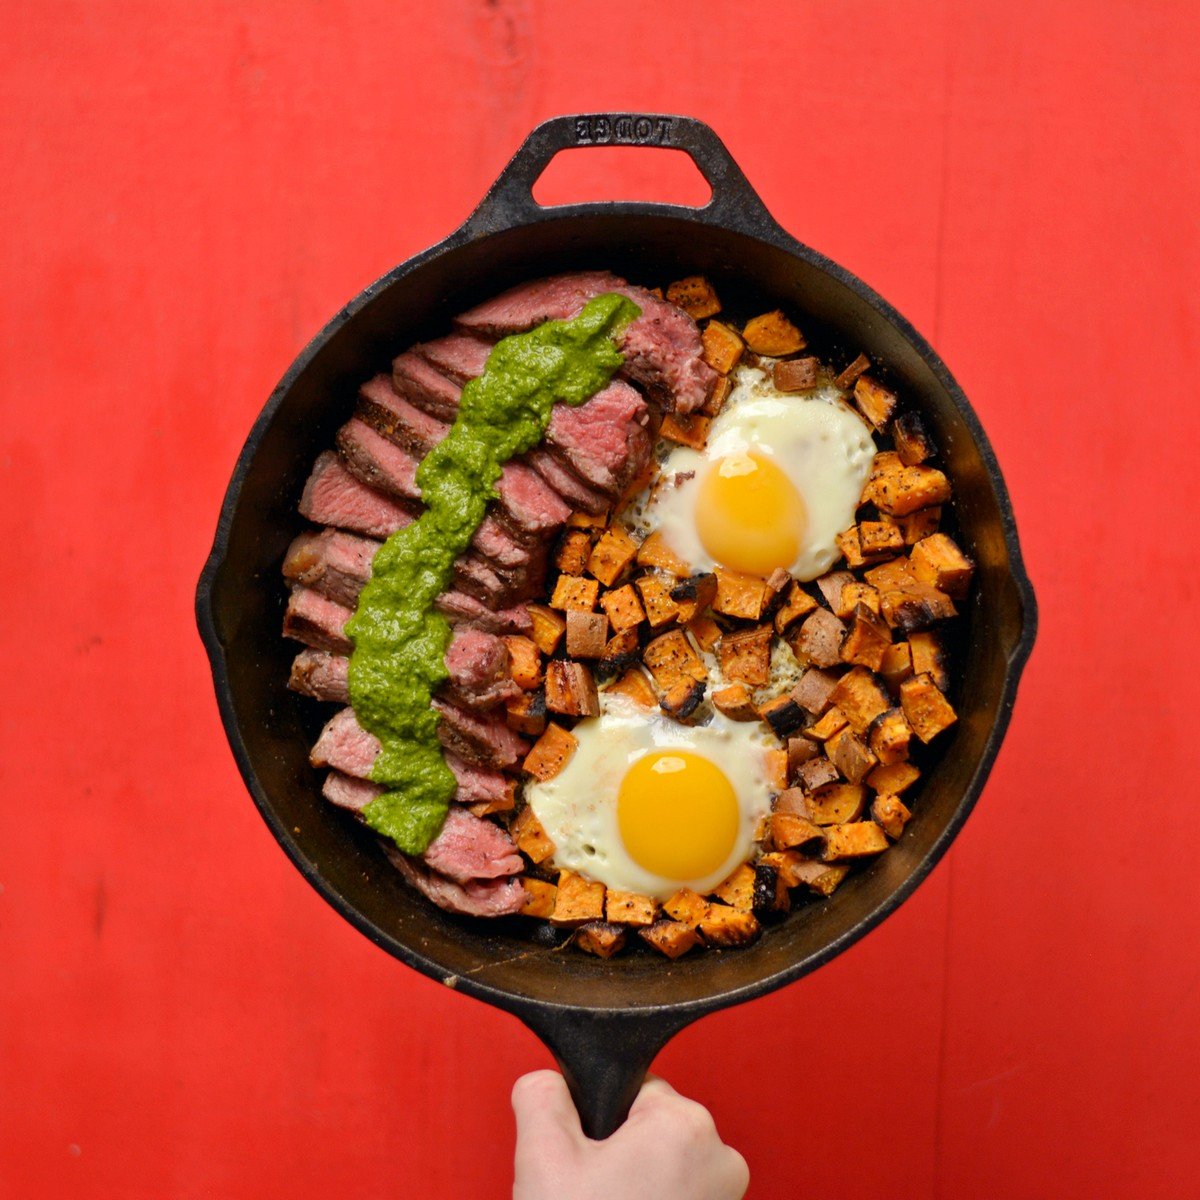 A hand holding the skillet of potatoes, eggs, and steak.